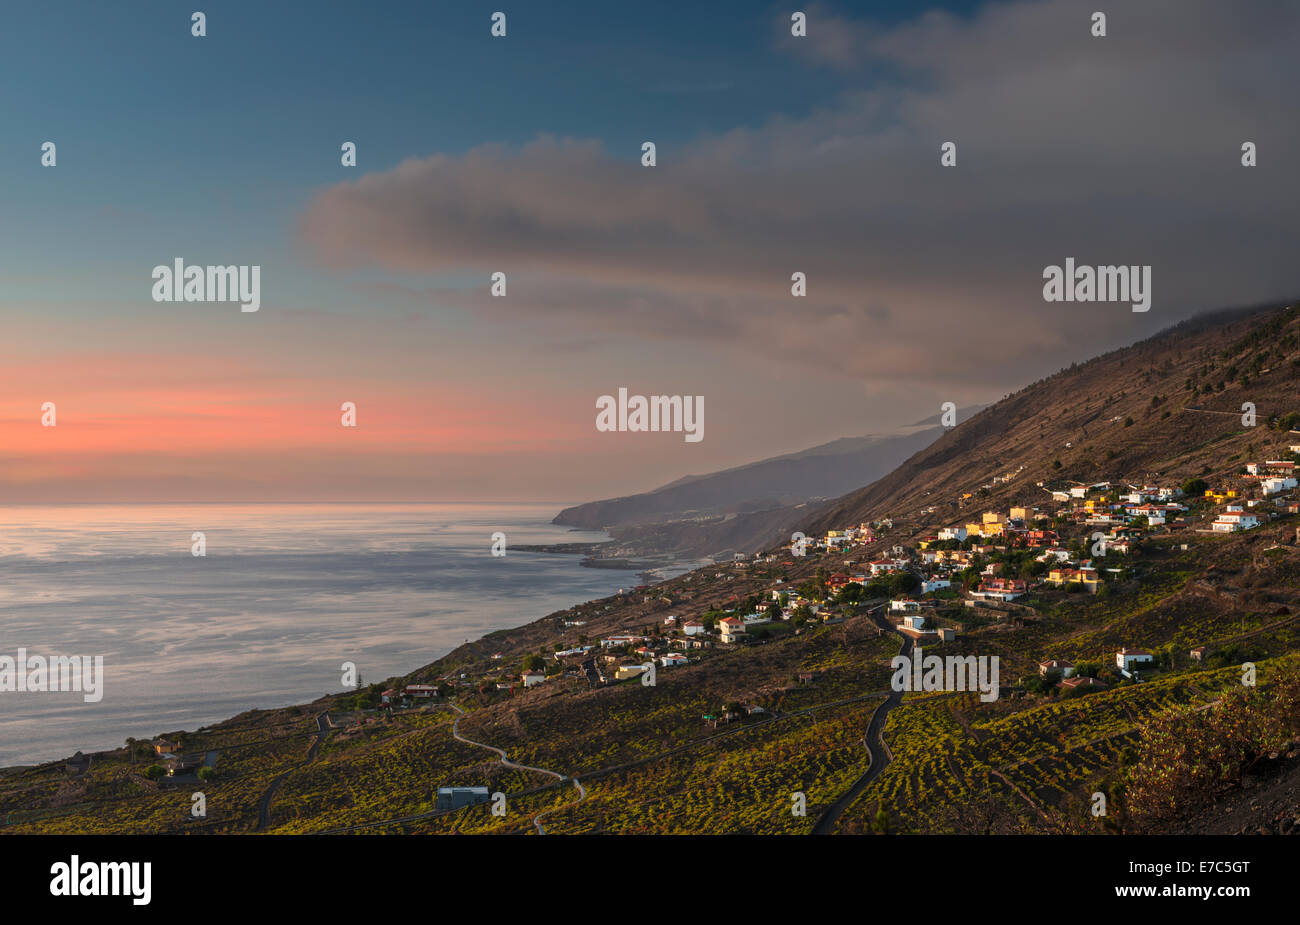 The south-western coast of La Palma, Canary Islands, at dusk looking northwards, with vineyards and the village of Las Indias Stock Photo